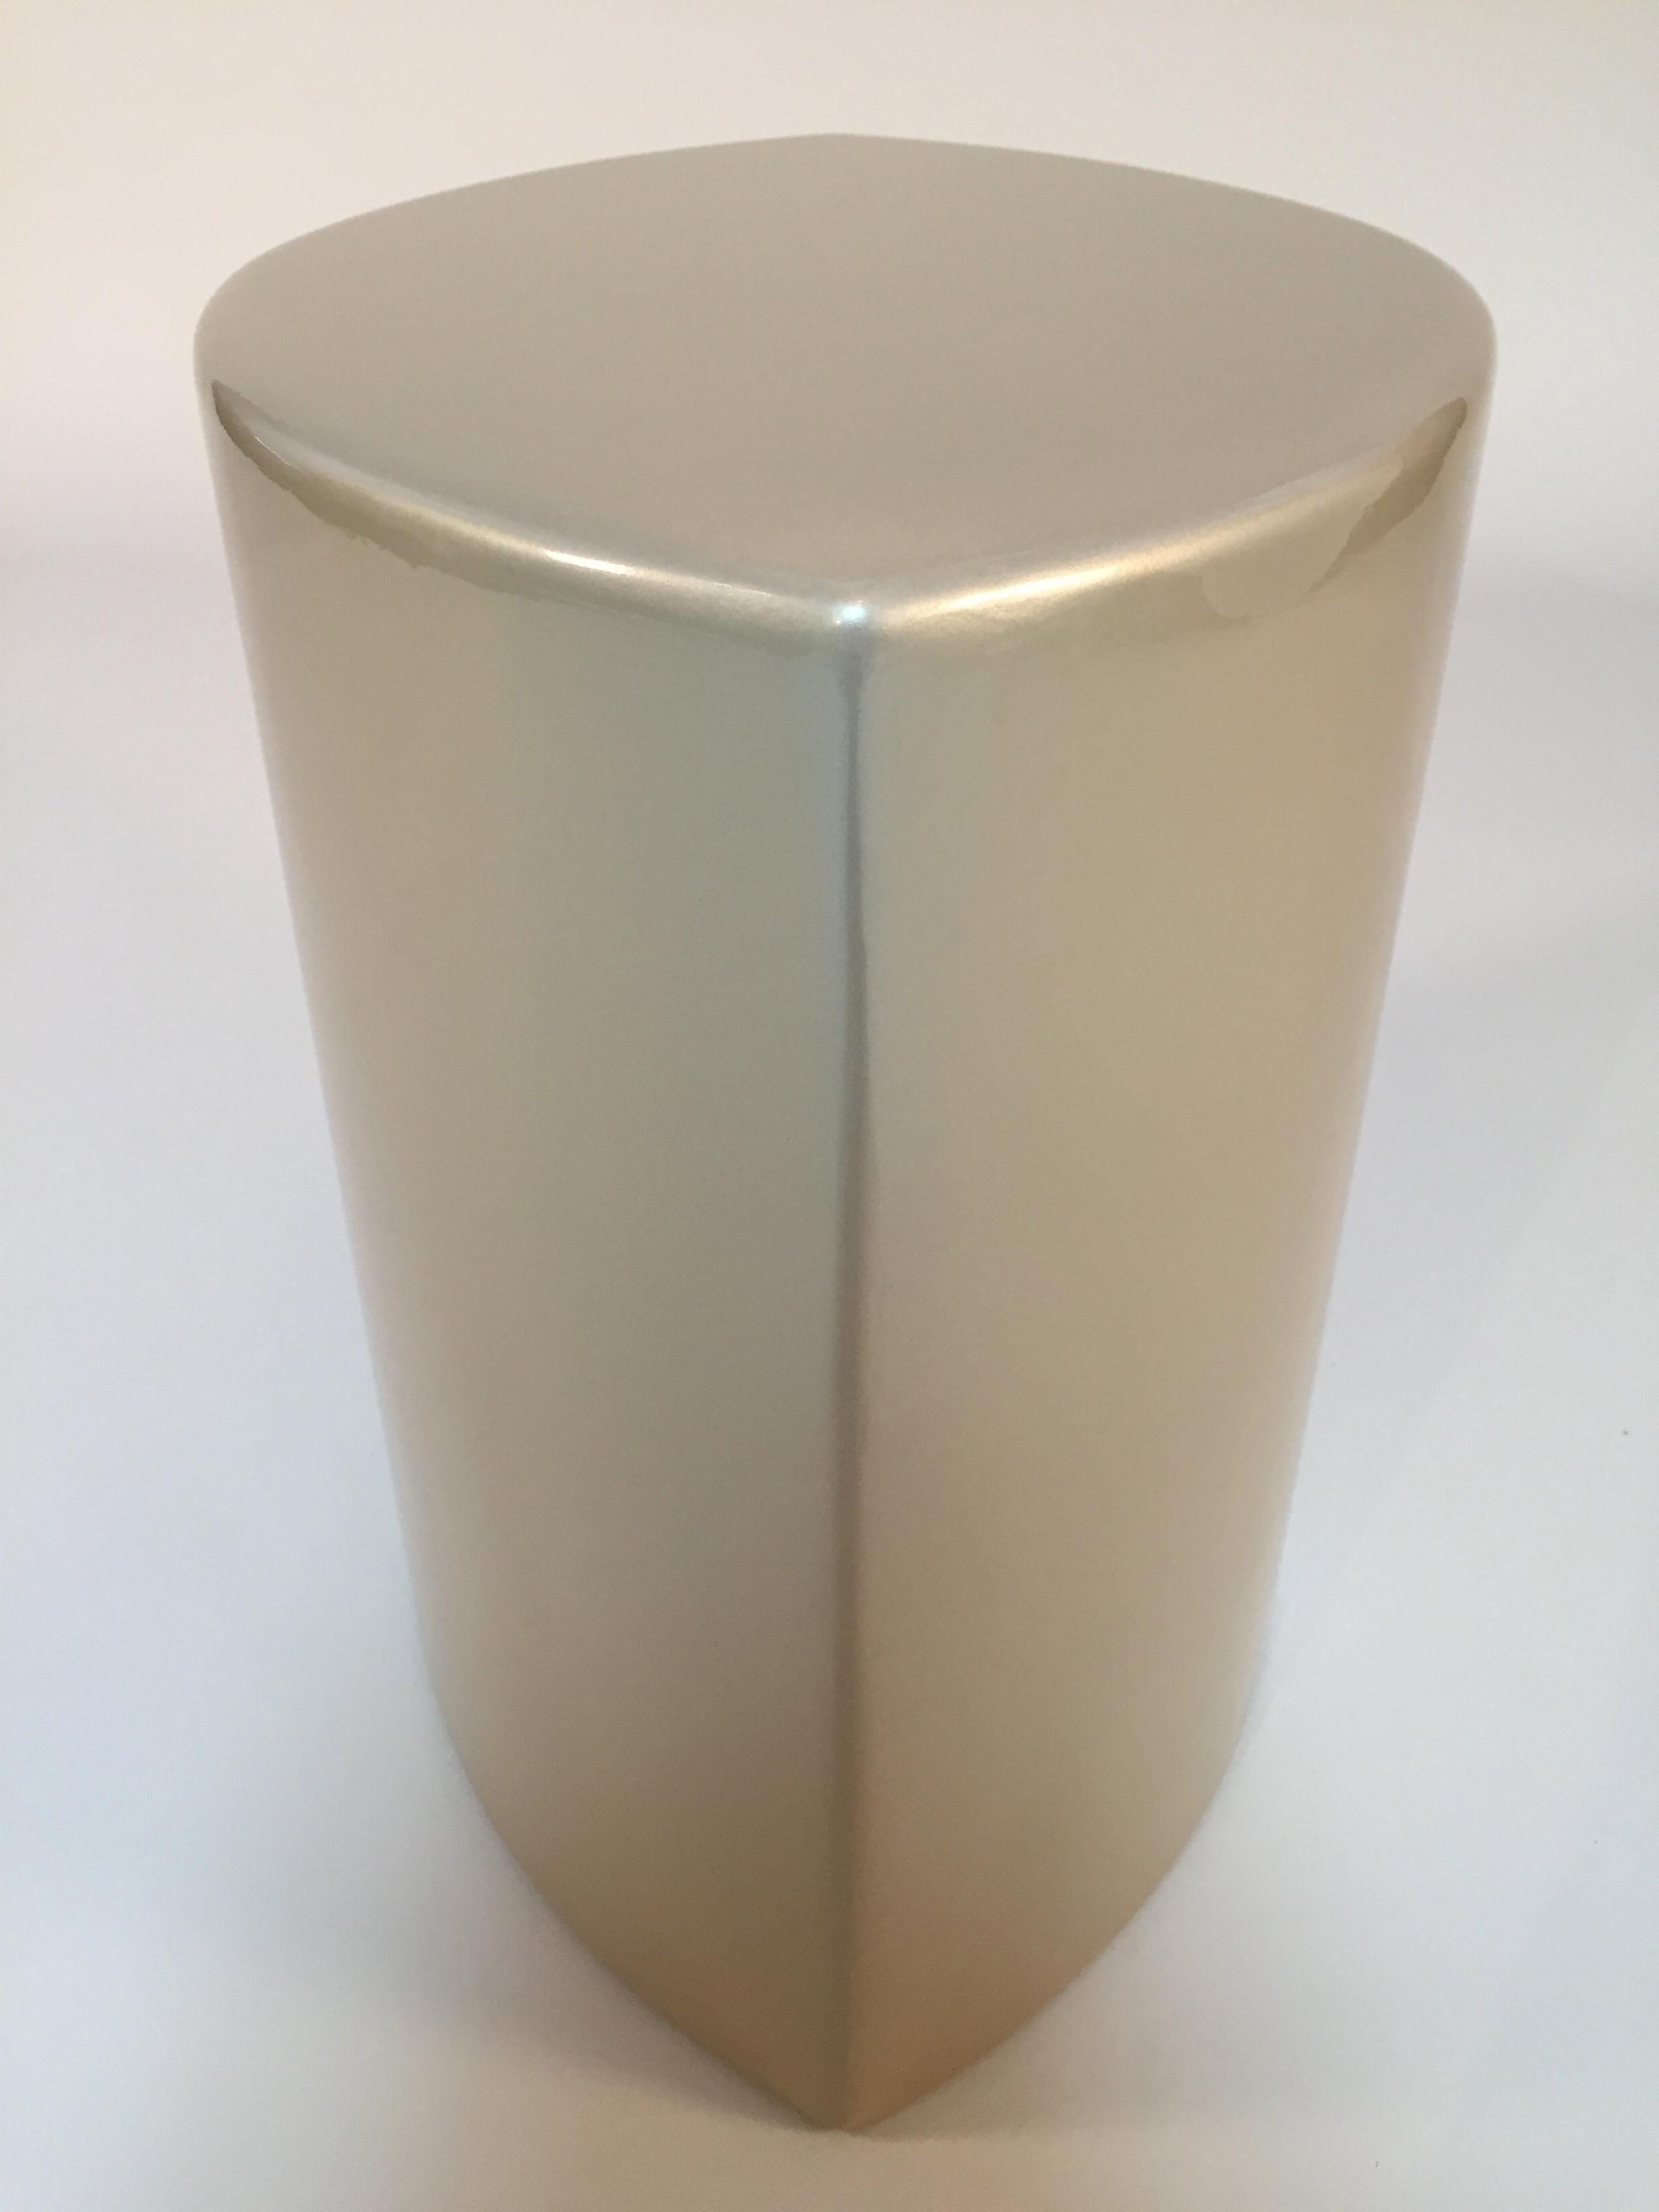 Handcrafted side table or seating by Gabriel M.
A soft organic sculptural form is the base for this finely finished lacquer piece. Brilliant champagne metallic gold give an elegant aesthetic to the softly shaped curves on a multi-use table or seat.